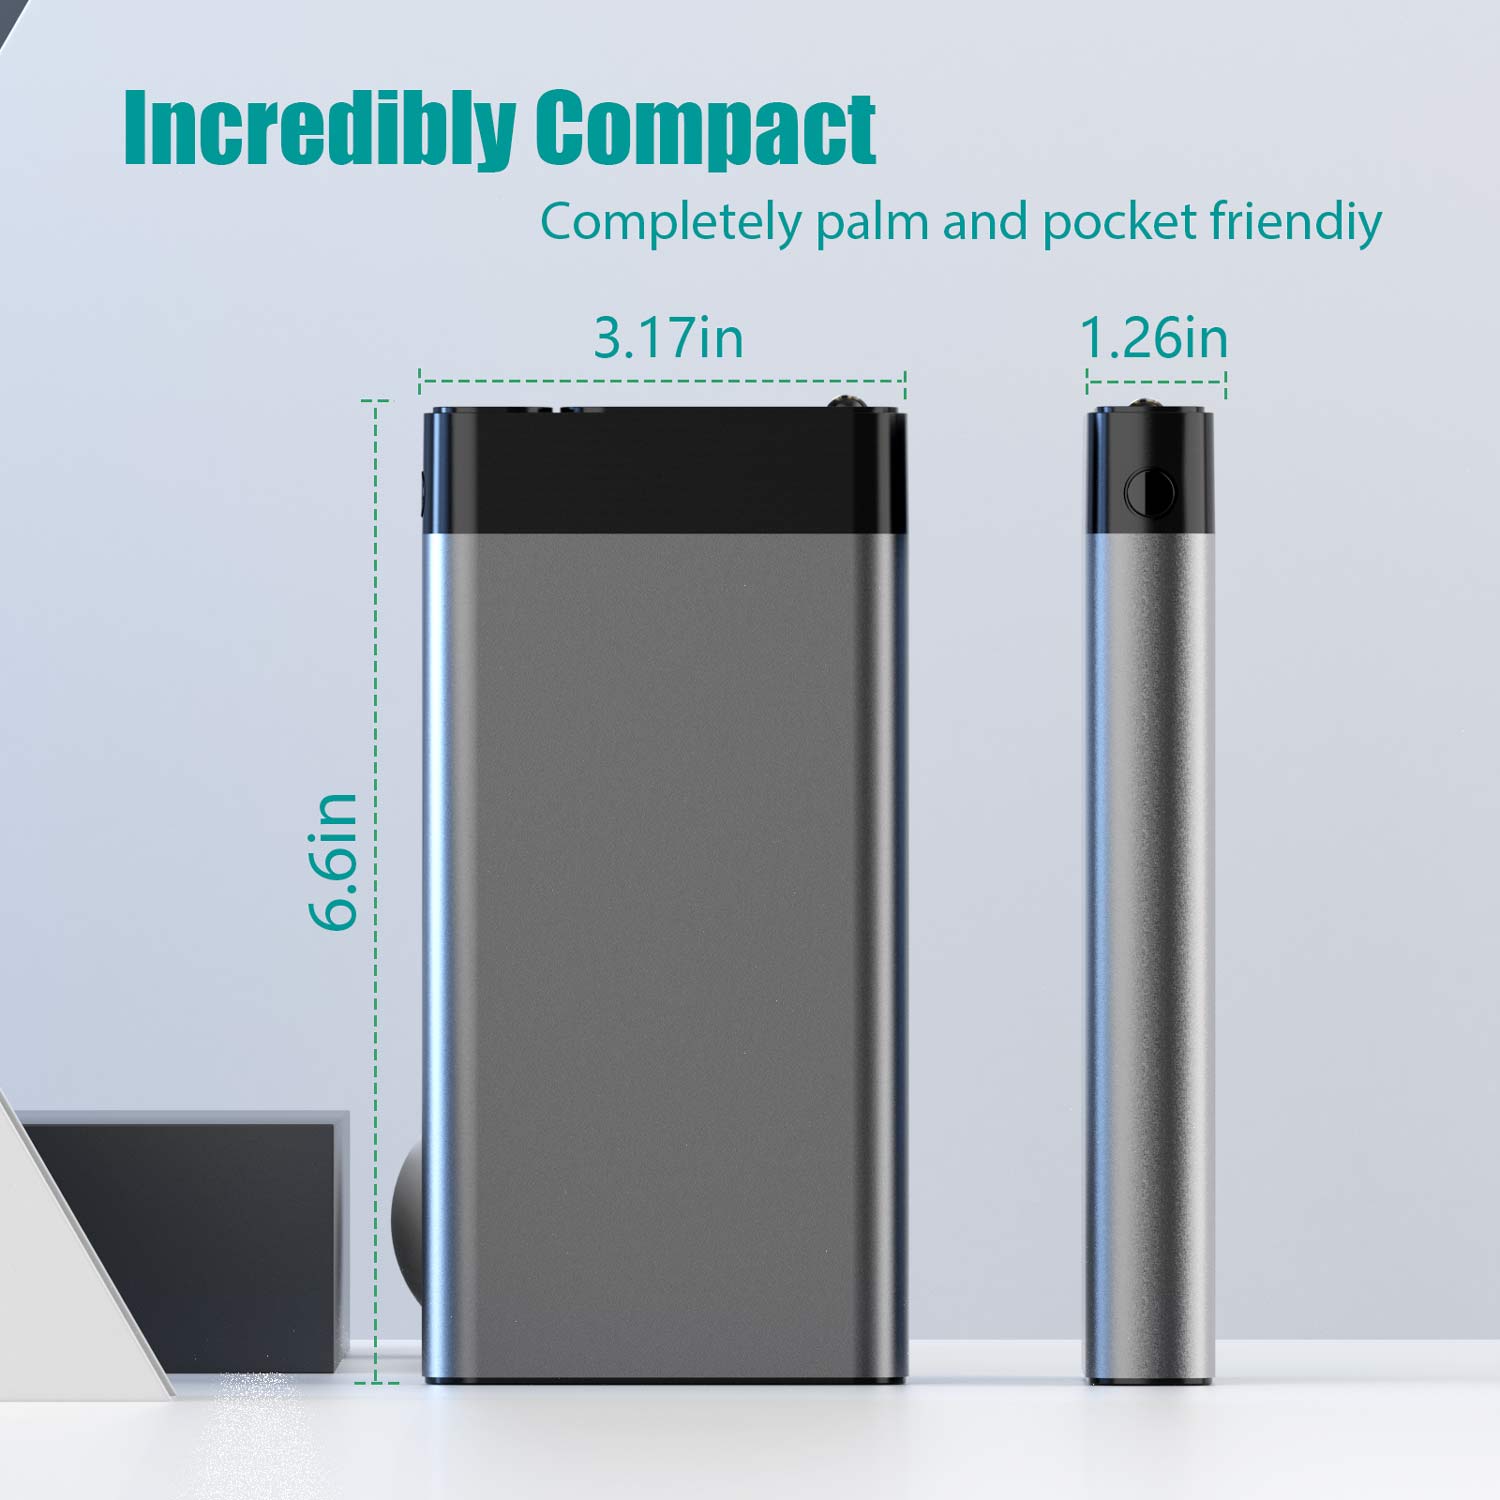 ELEFULL-Portable Power Bank, 26800mAh with QC3.0 22.5W & USB C PD20W Fast Charger in Secure Metal Case, LED Display, Flashlight - Compact & Stylish Chargers For iphone, ipad, Samsung, Huawei, Smartphones etc.